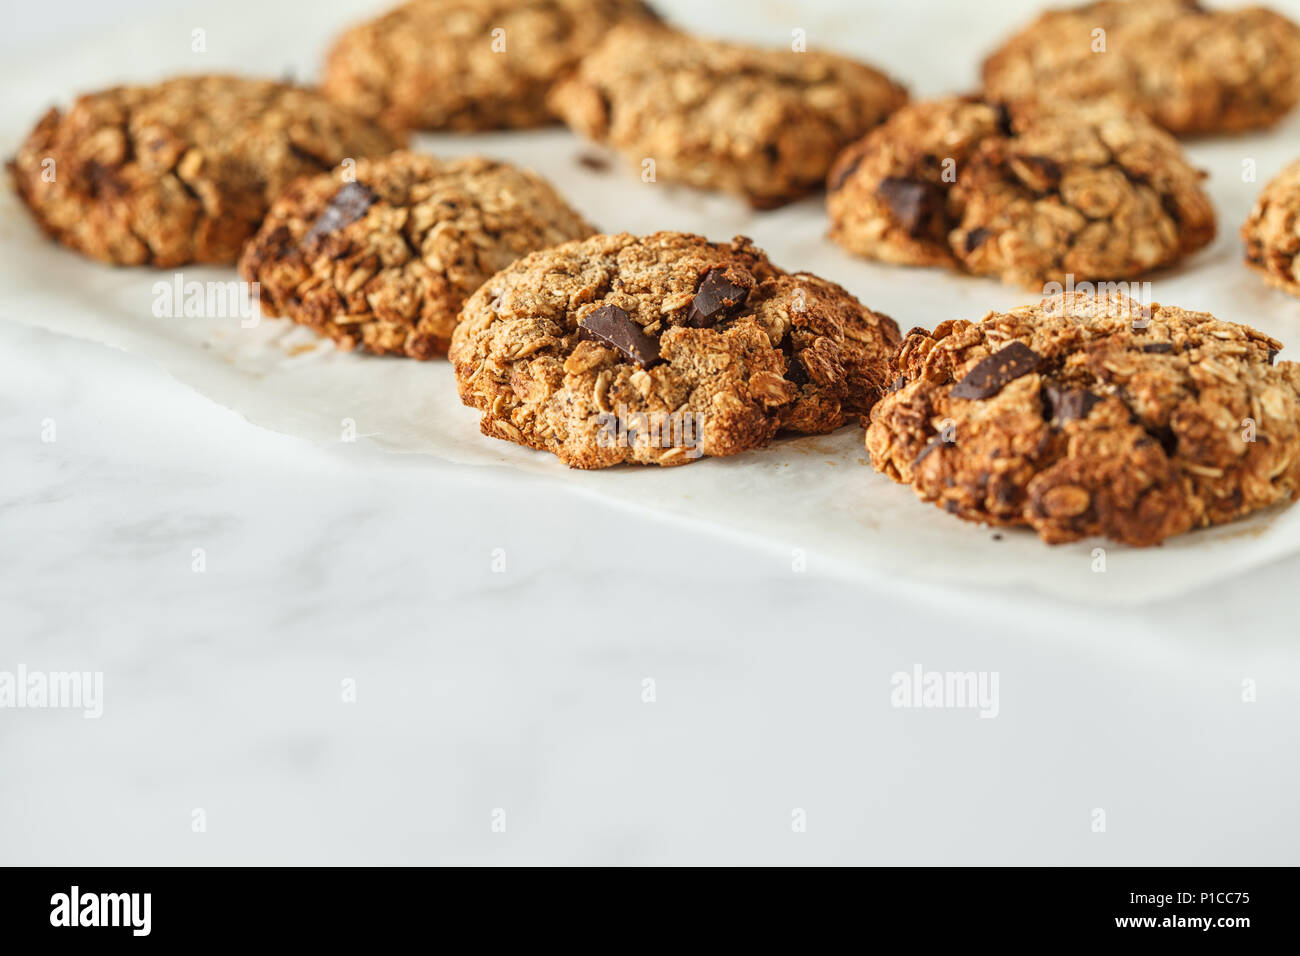 Vegan oatmeal cookies with chocolate on a light background. Food blog style concept. Stock Photo